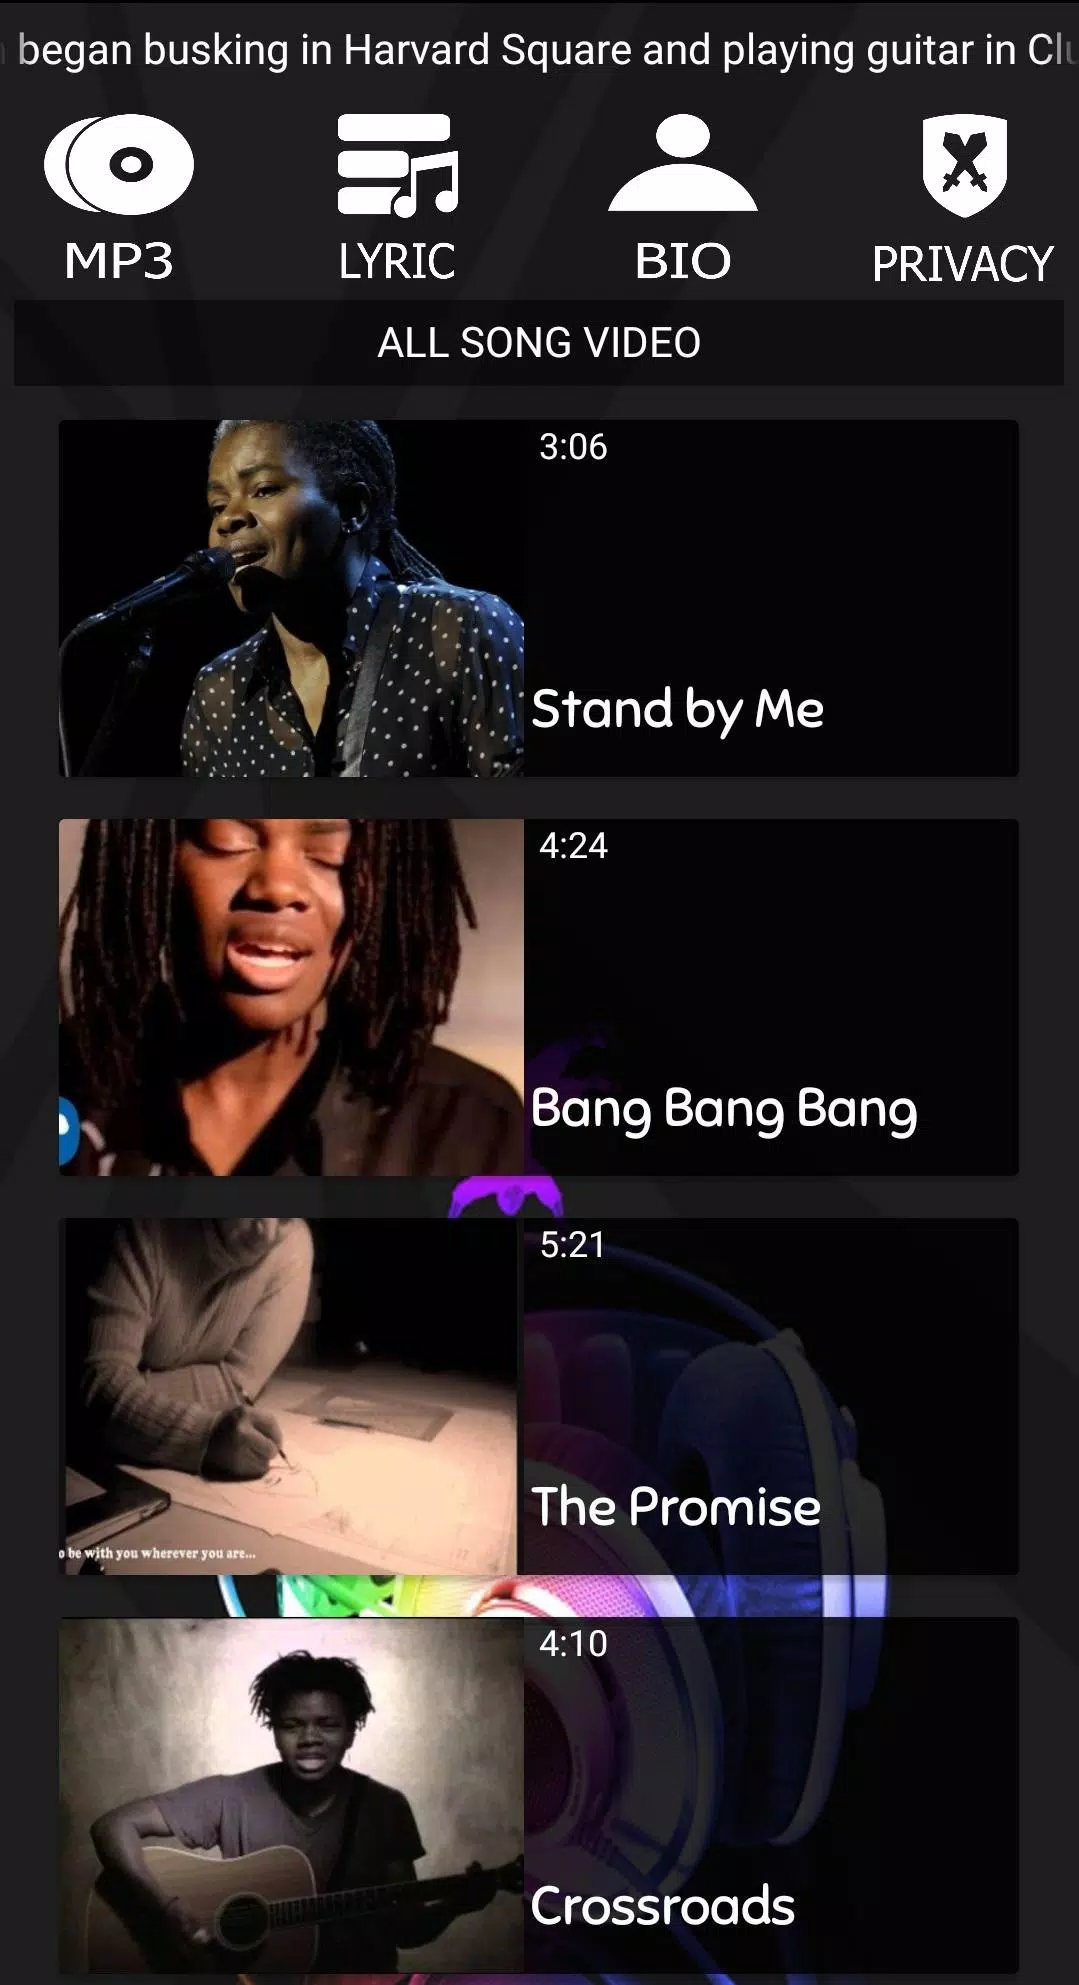 Download do APK de Tracy Chapman Video Songs & Mp3 para Android